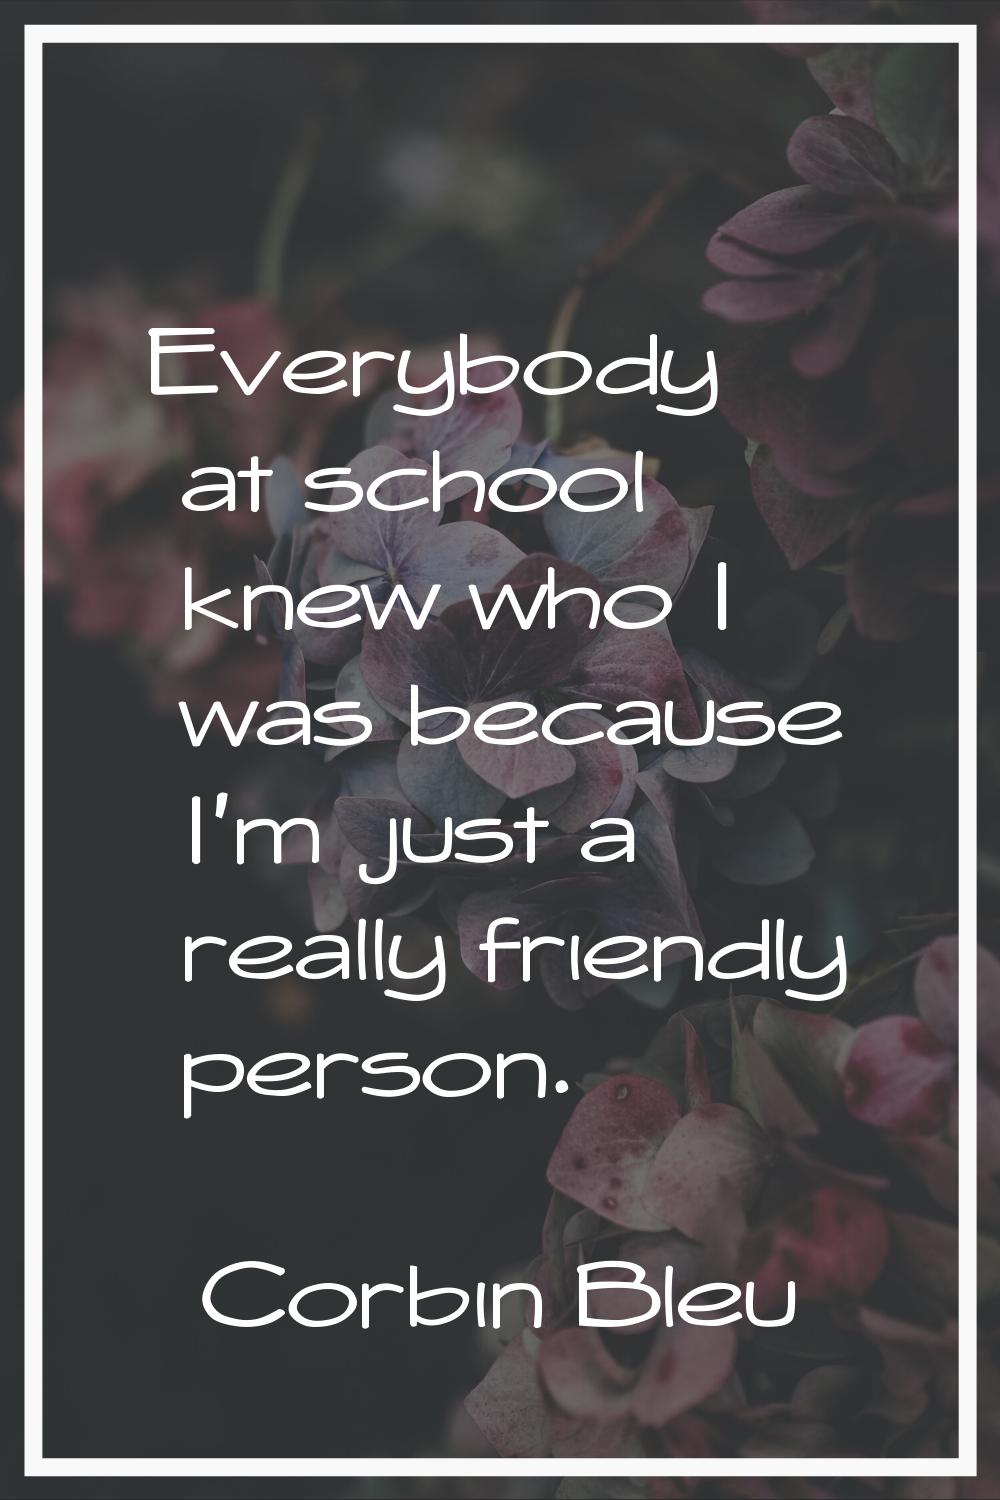 Everybody at school knew who I was because I'm just a really friendly person.